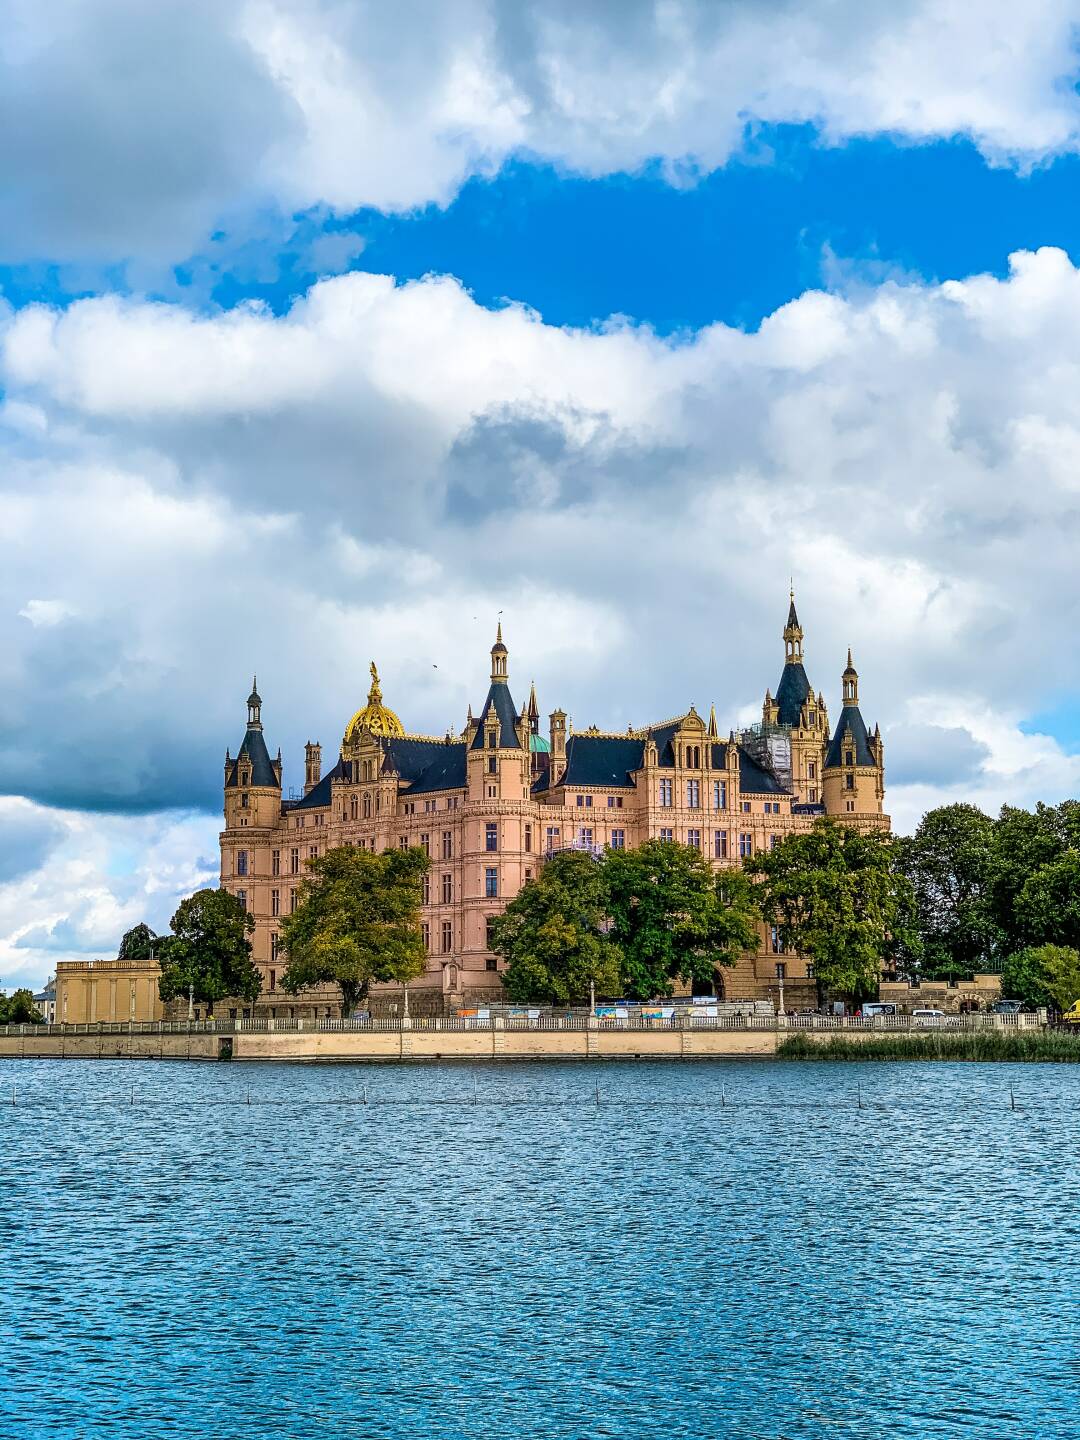 Schwerin Castle has stood proudly on its small island in Lake Schwerin for 1000 years